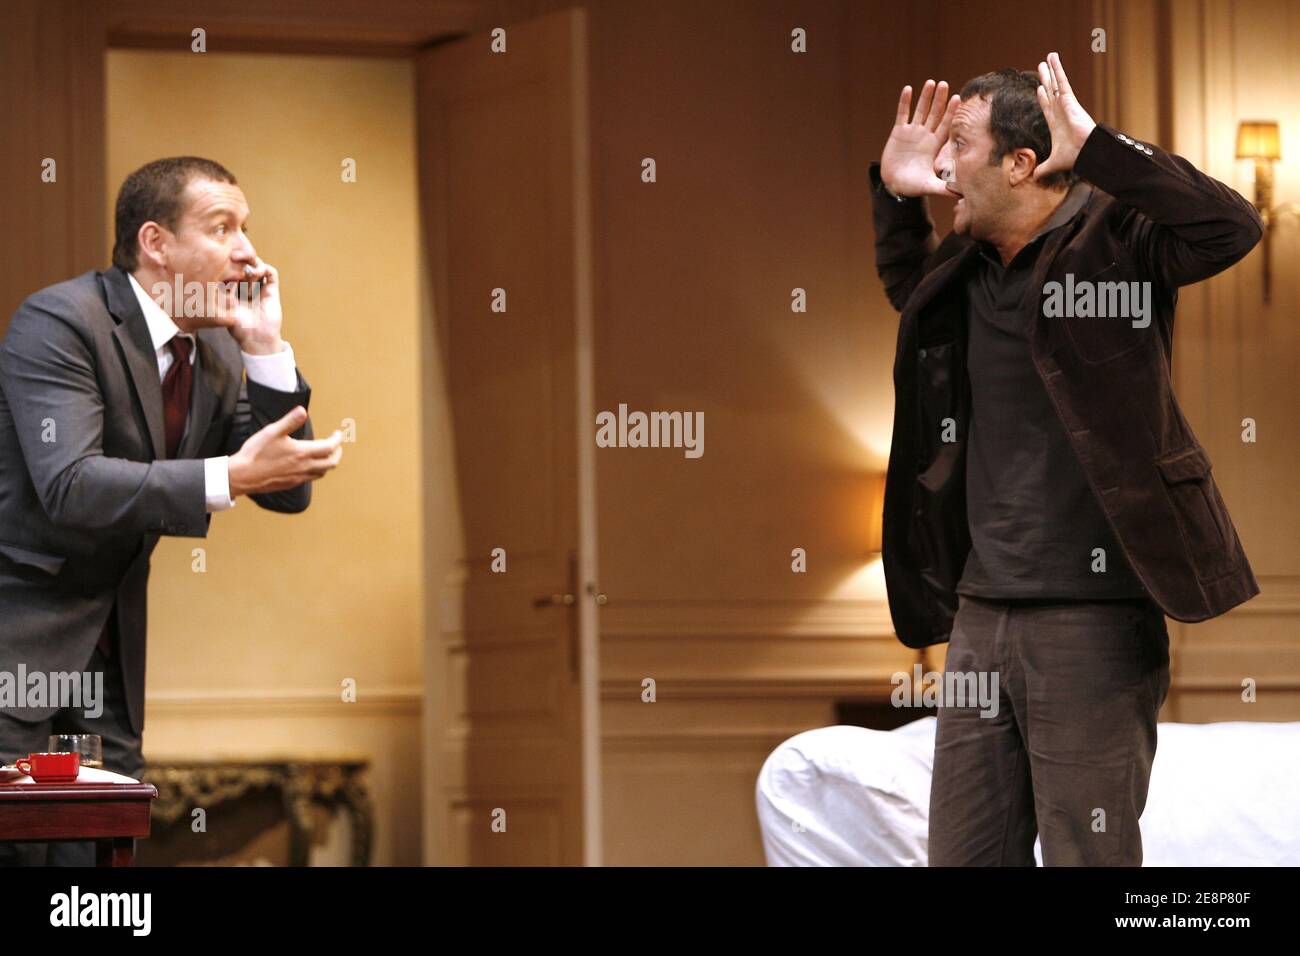 French actors Dany Boon and Arthur during the run-through of the play 'Le Diner de Cons', staged by Francis Veber at the Theatre de la Porte Saint-Martin in Paris, France on September 19, 2007. Also starring in the play: Laurent Gamelon, Stephane Bierry, Jessica Borio, Olivier Granier and Juliette Meyniac. Photo by Thierry Orban/ABACAPRESS.COM Stock Photo